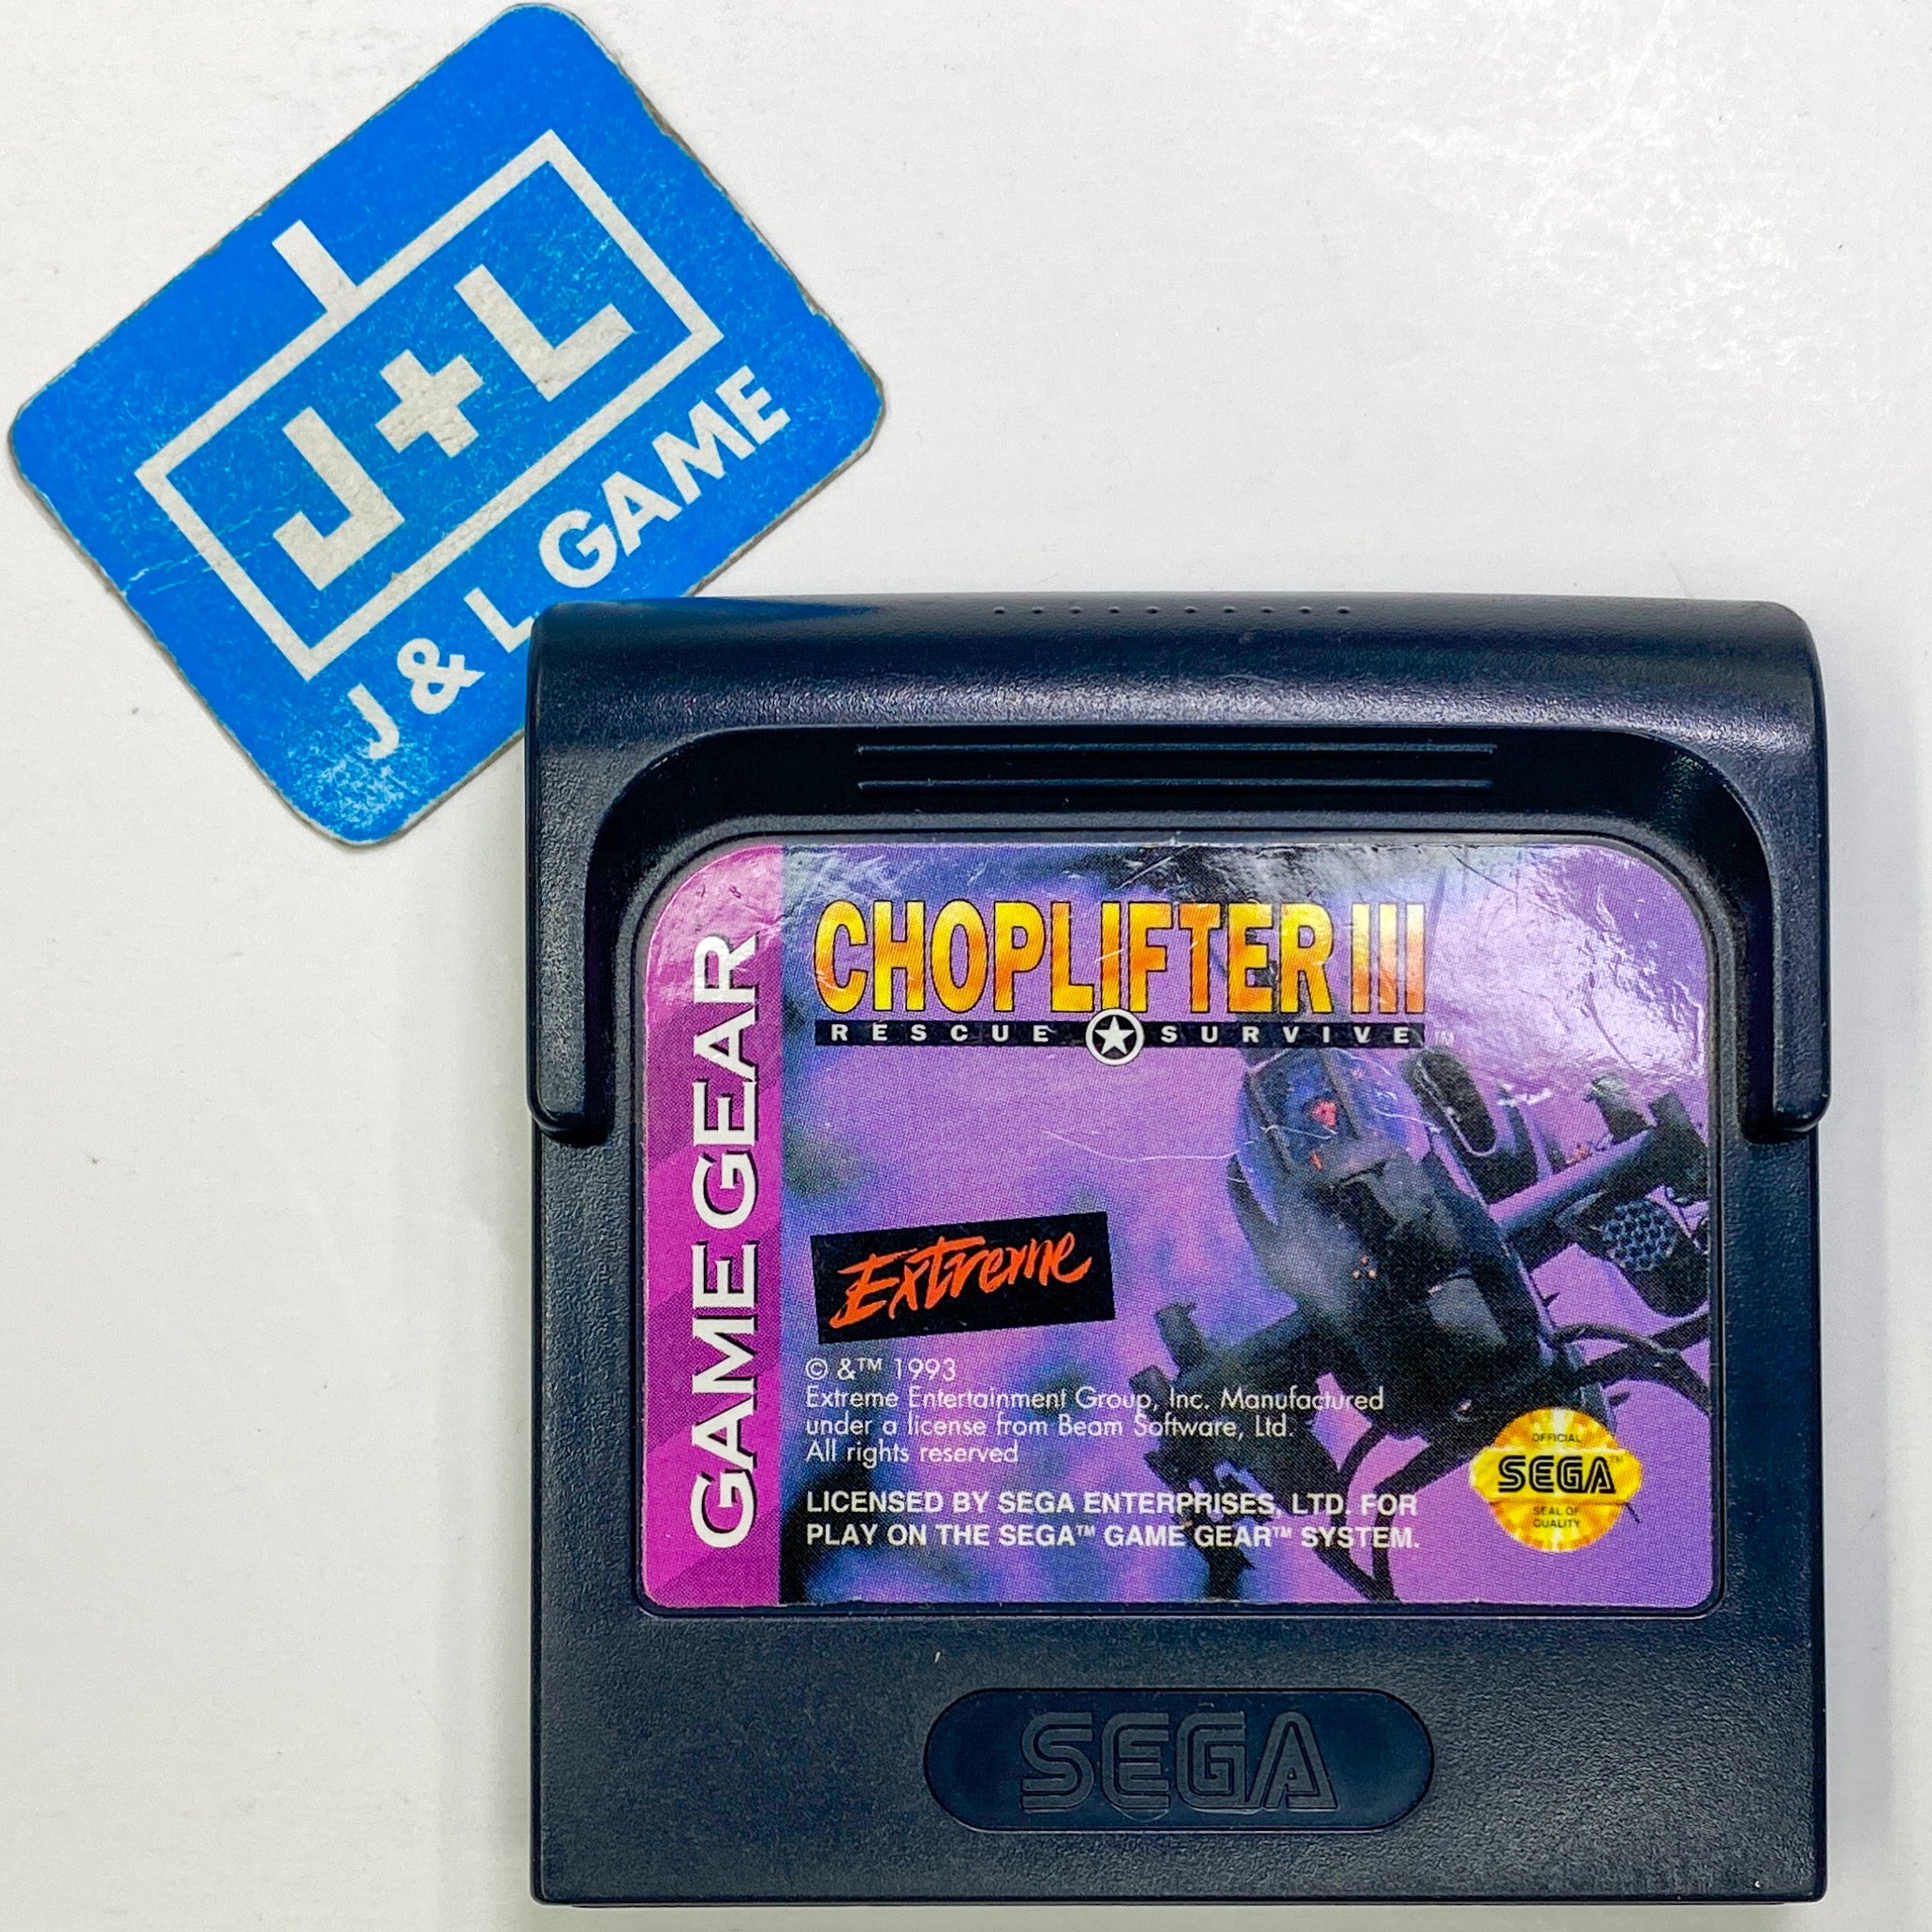 Choplifter III - SEGA GameGear [Pre-Owned] Video Games Extreme Entertainment Group   